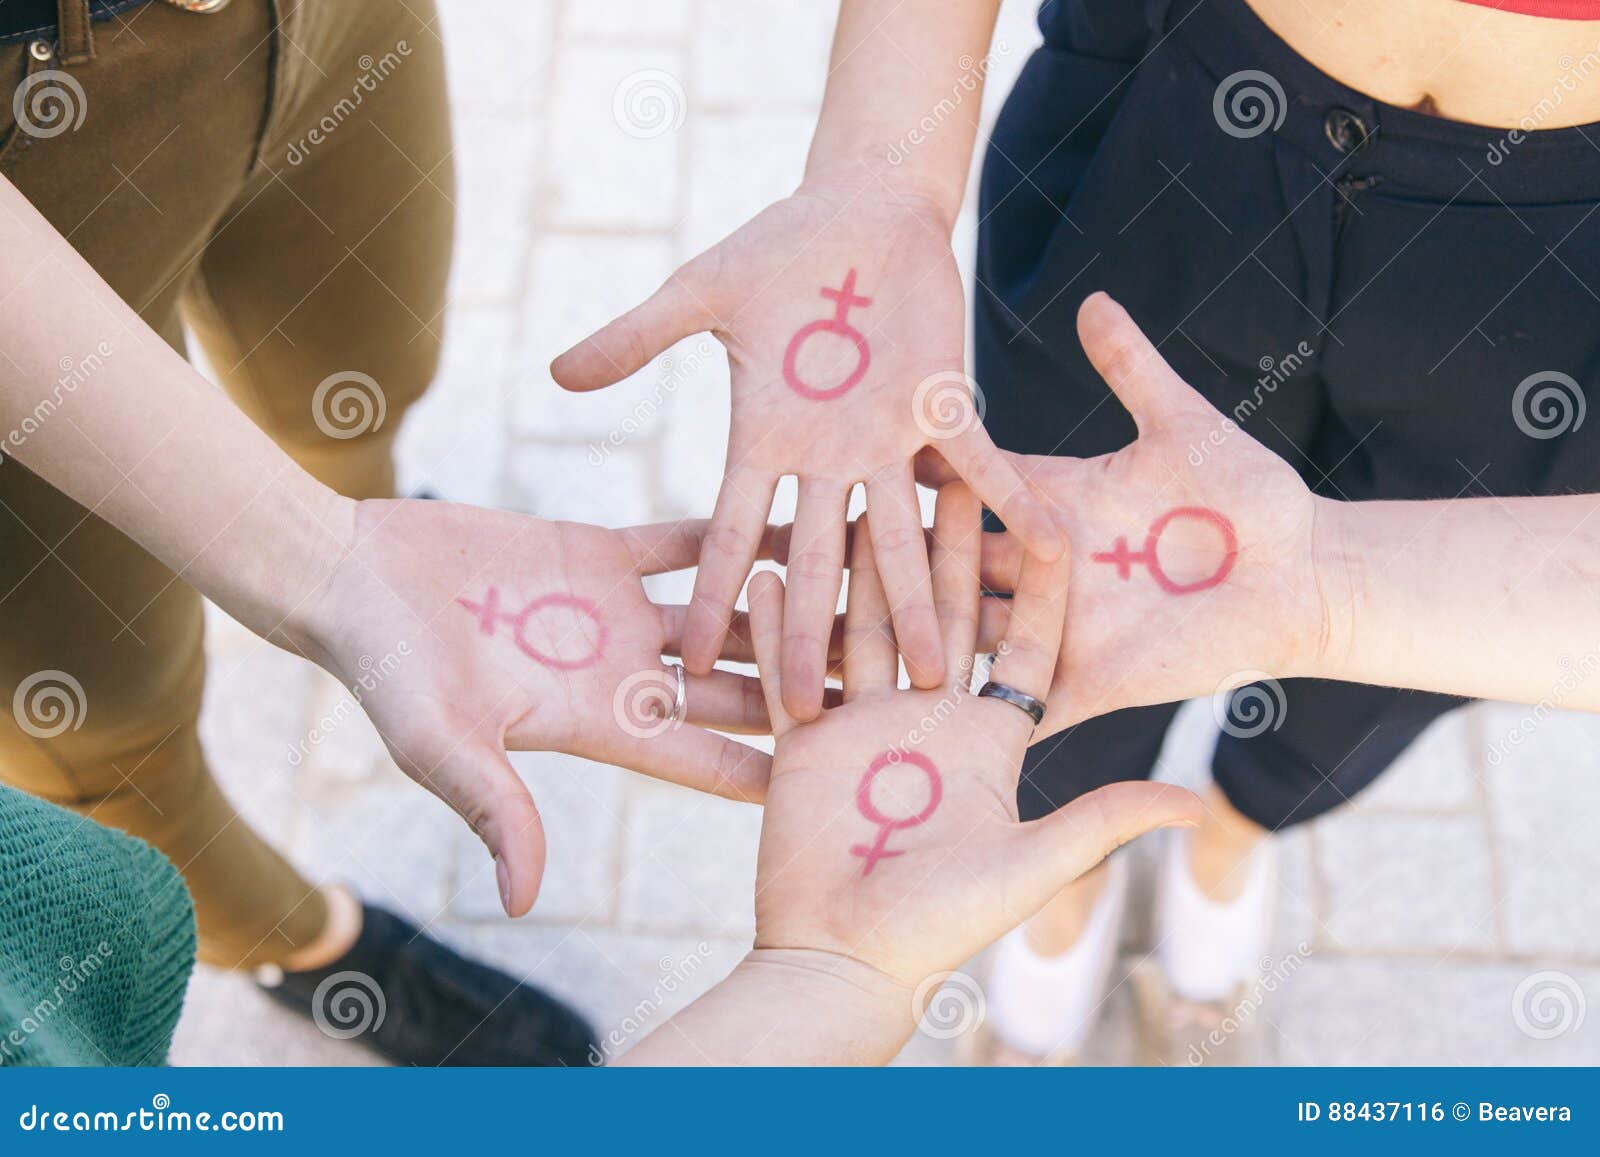 close up of small group of women with the  of feminism written on her hands